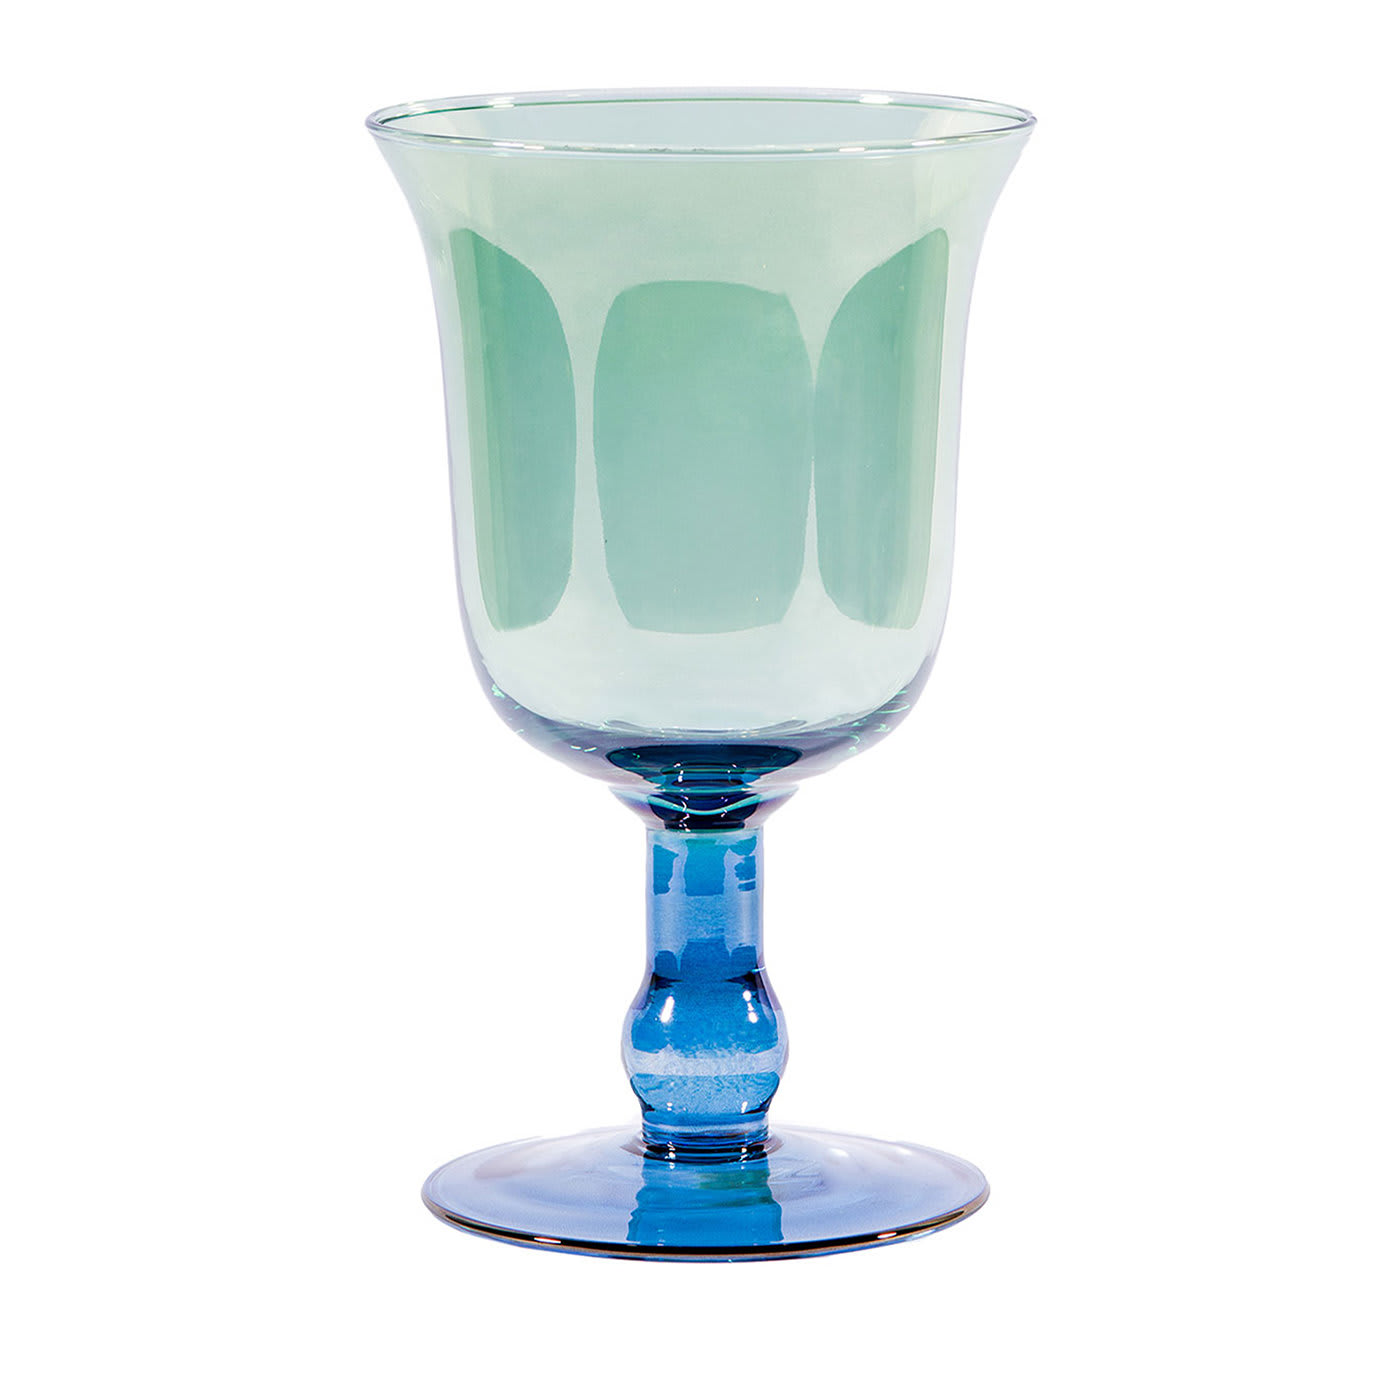 Large Blue-To-Green Goblet Vase - Luisa Beccaria